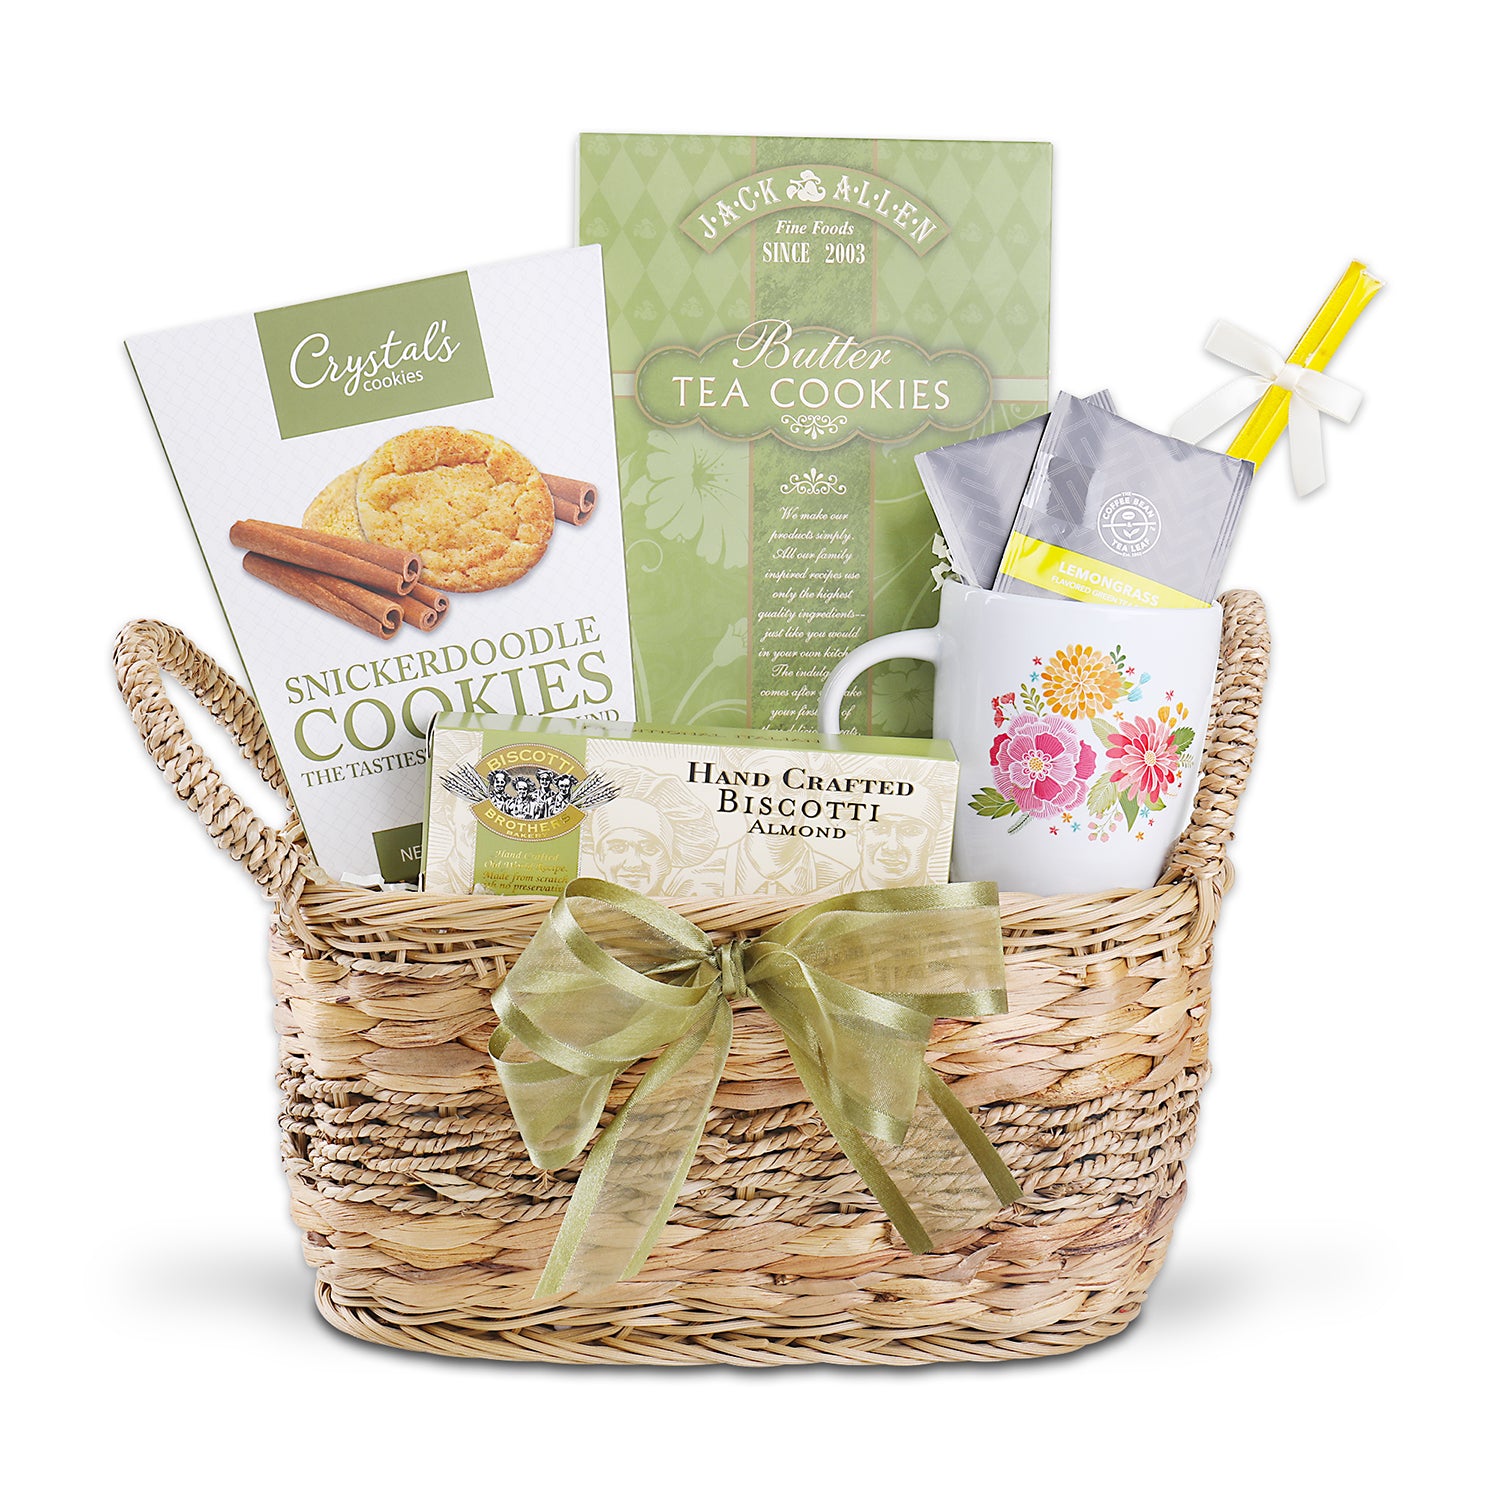 Gift with contents in the gift basket